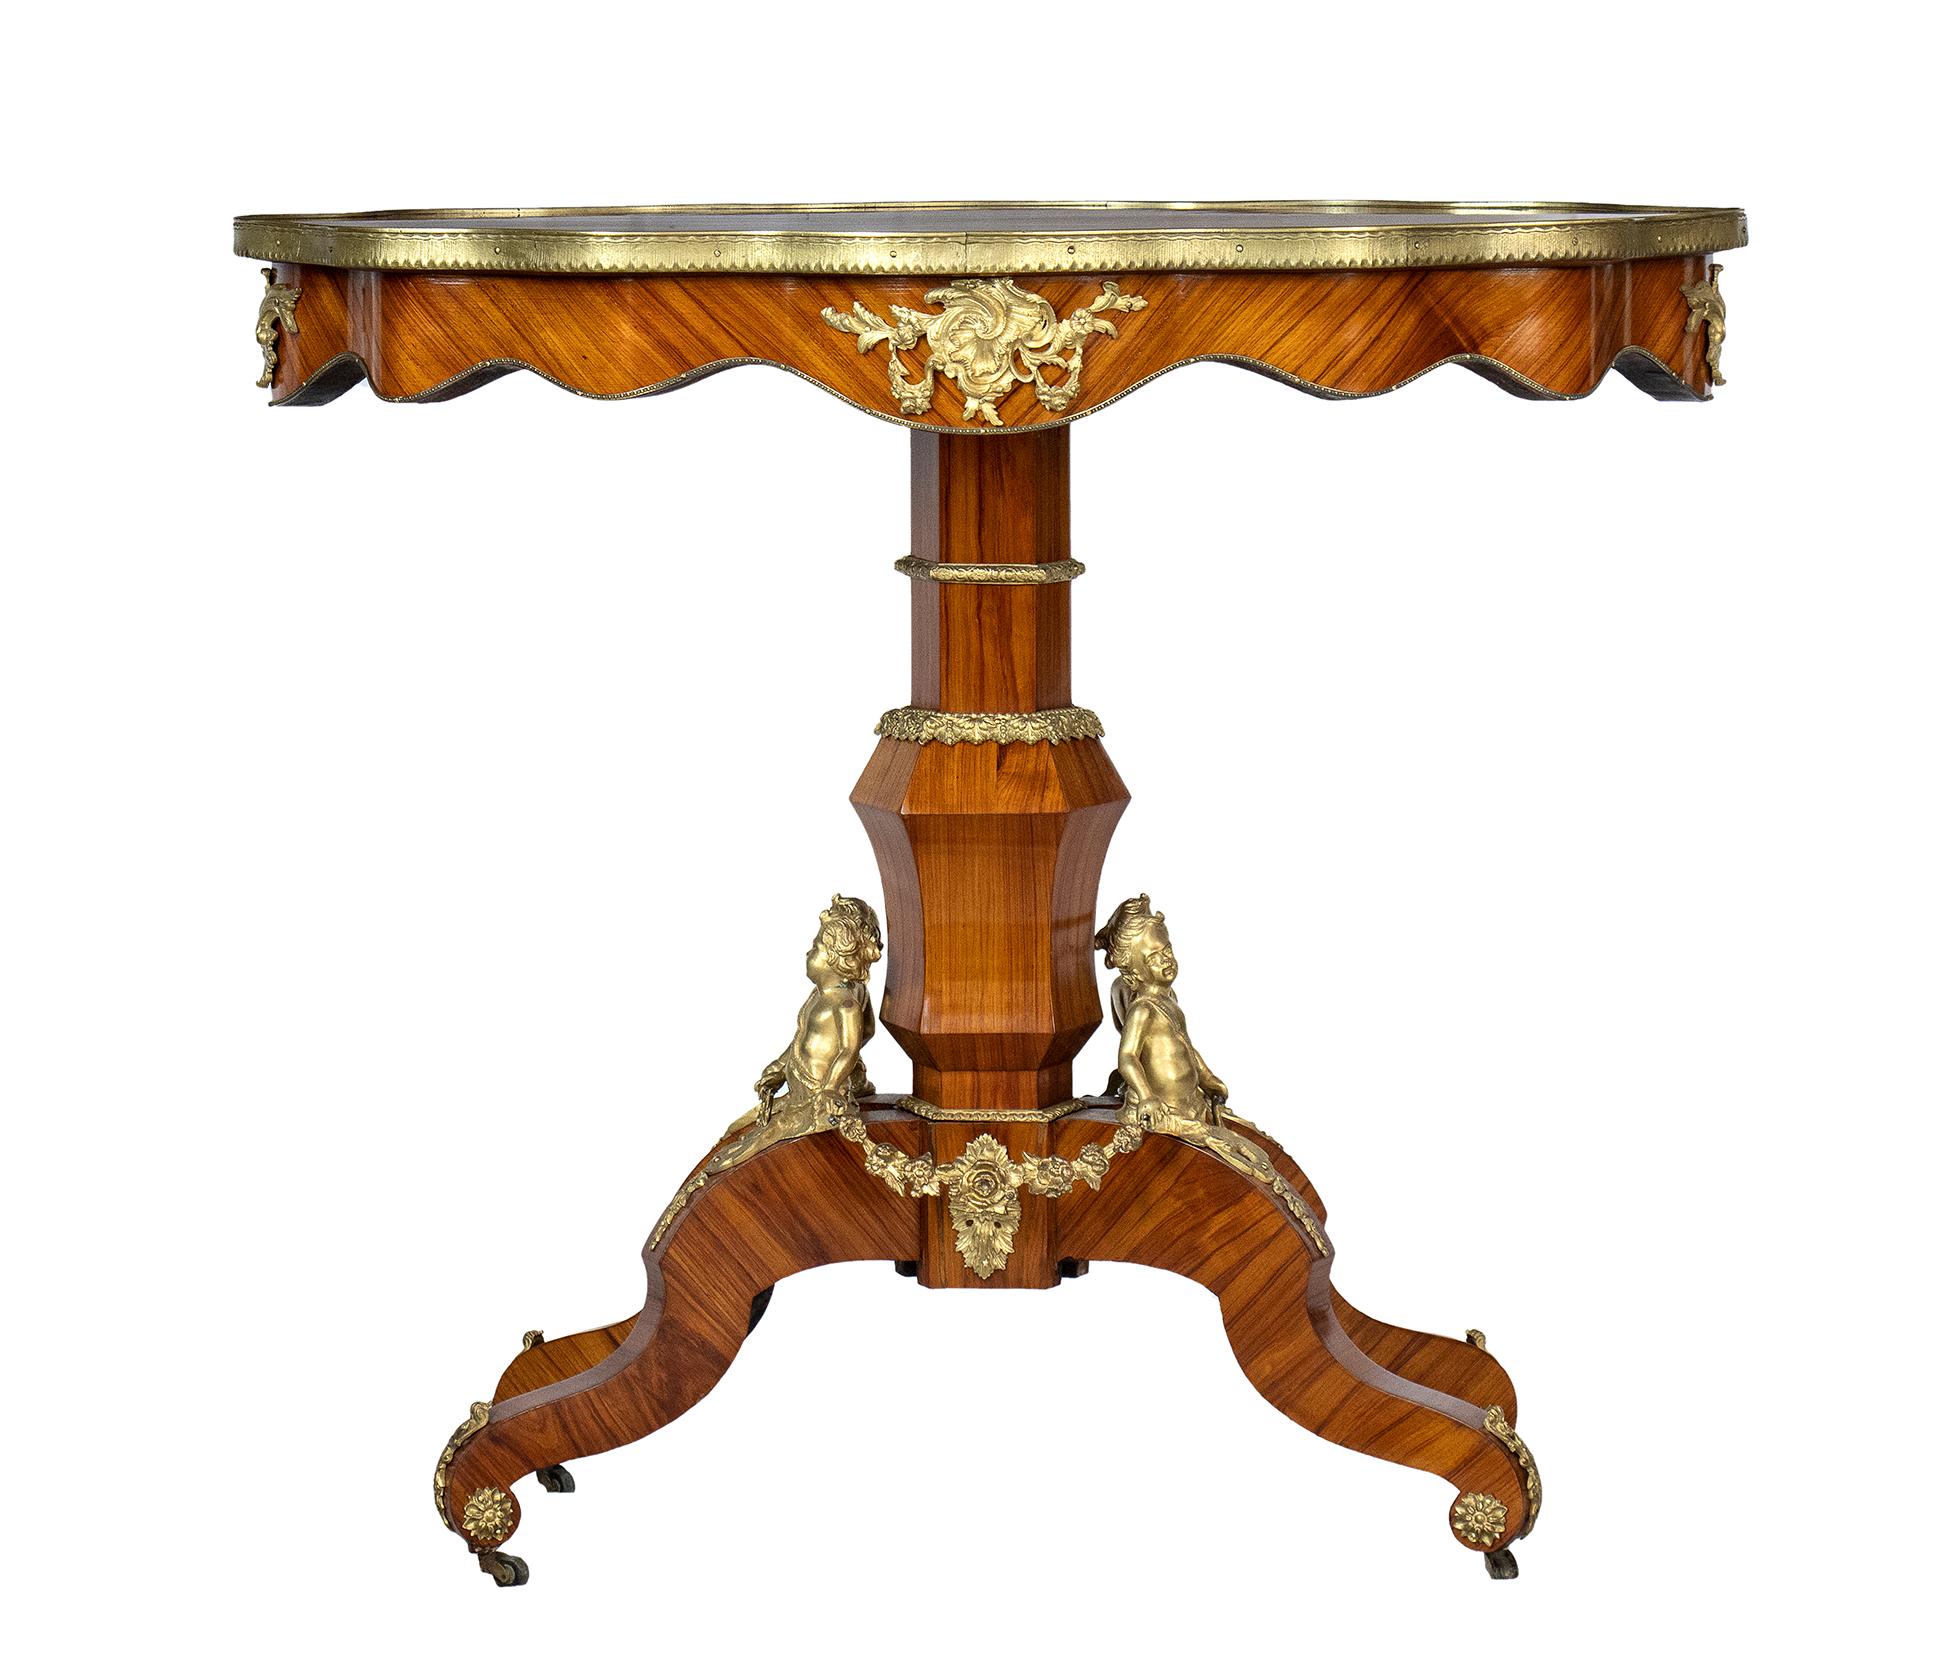 Center table, Napoleon III in purple ebony wood - French provenance,19th century era
Four-footed center-leg base surmounted by bronzes depicting putto busts holding interconnected garlands, top is surrounded by a bronze frame.
Height x width x